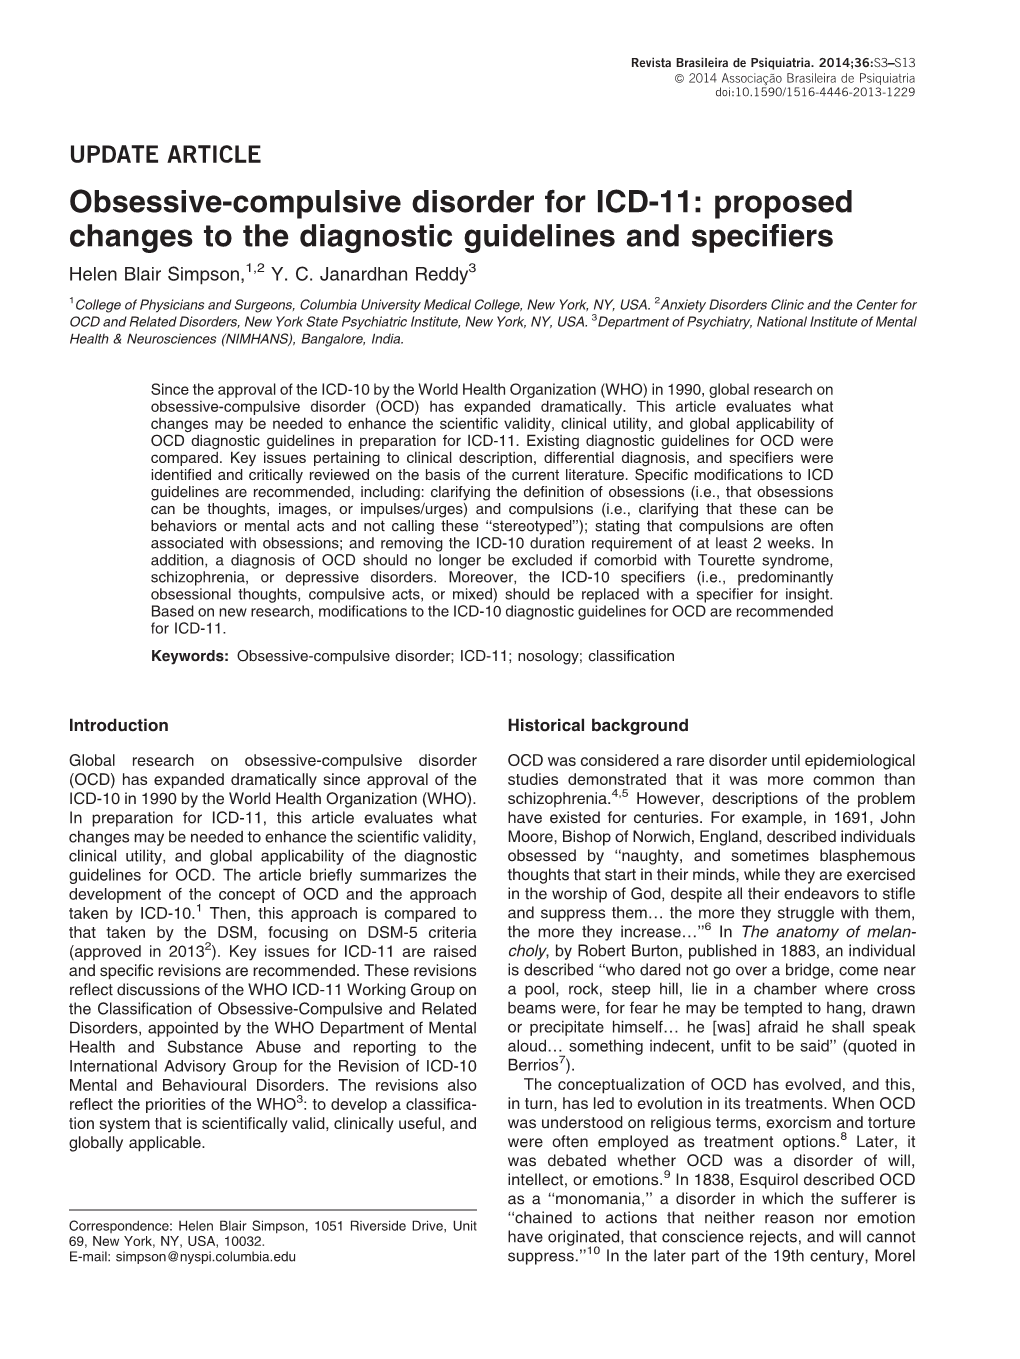 Obsessive-Compulsive Disorder for ICD-11: Proposed Changes to the Diagnostic Guidelines and Specifiers Helen Blair Simpson,1,2 Y